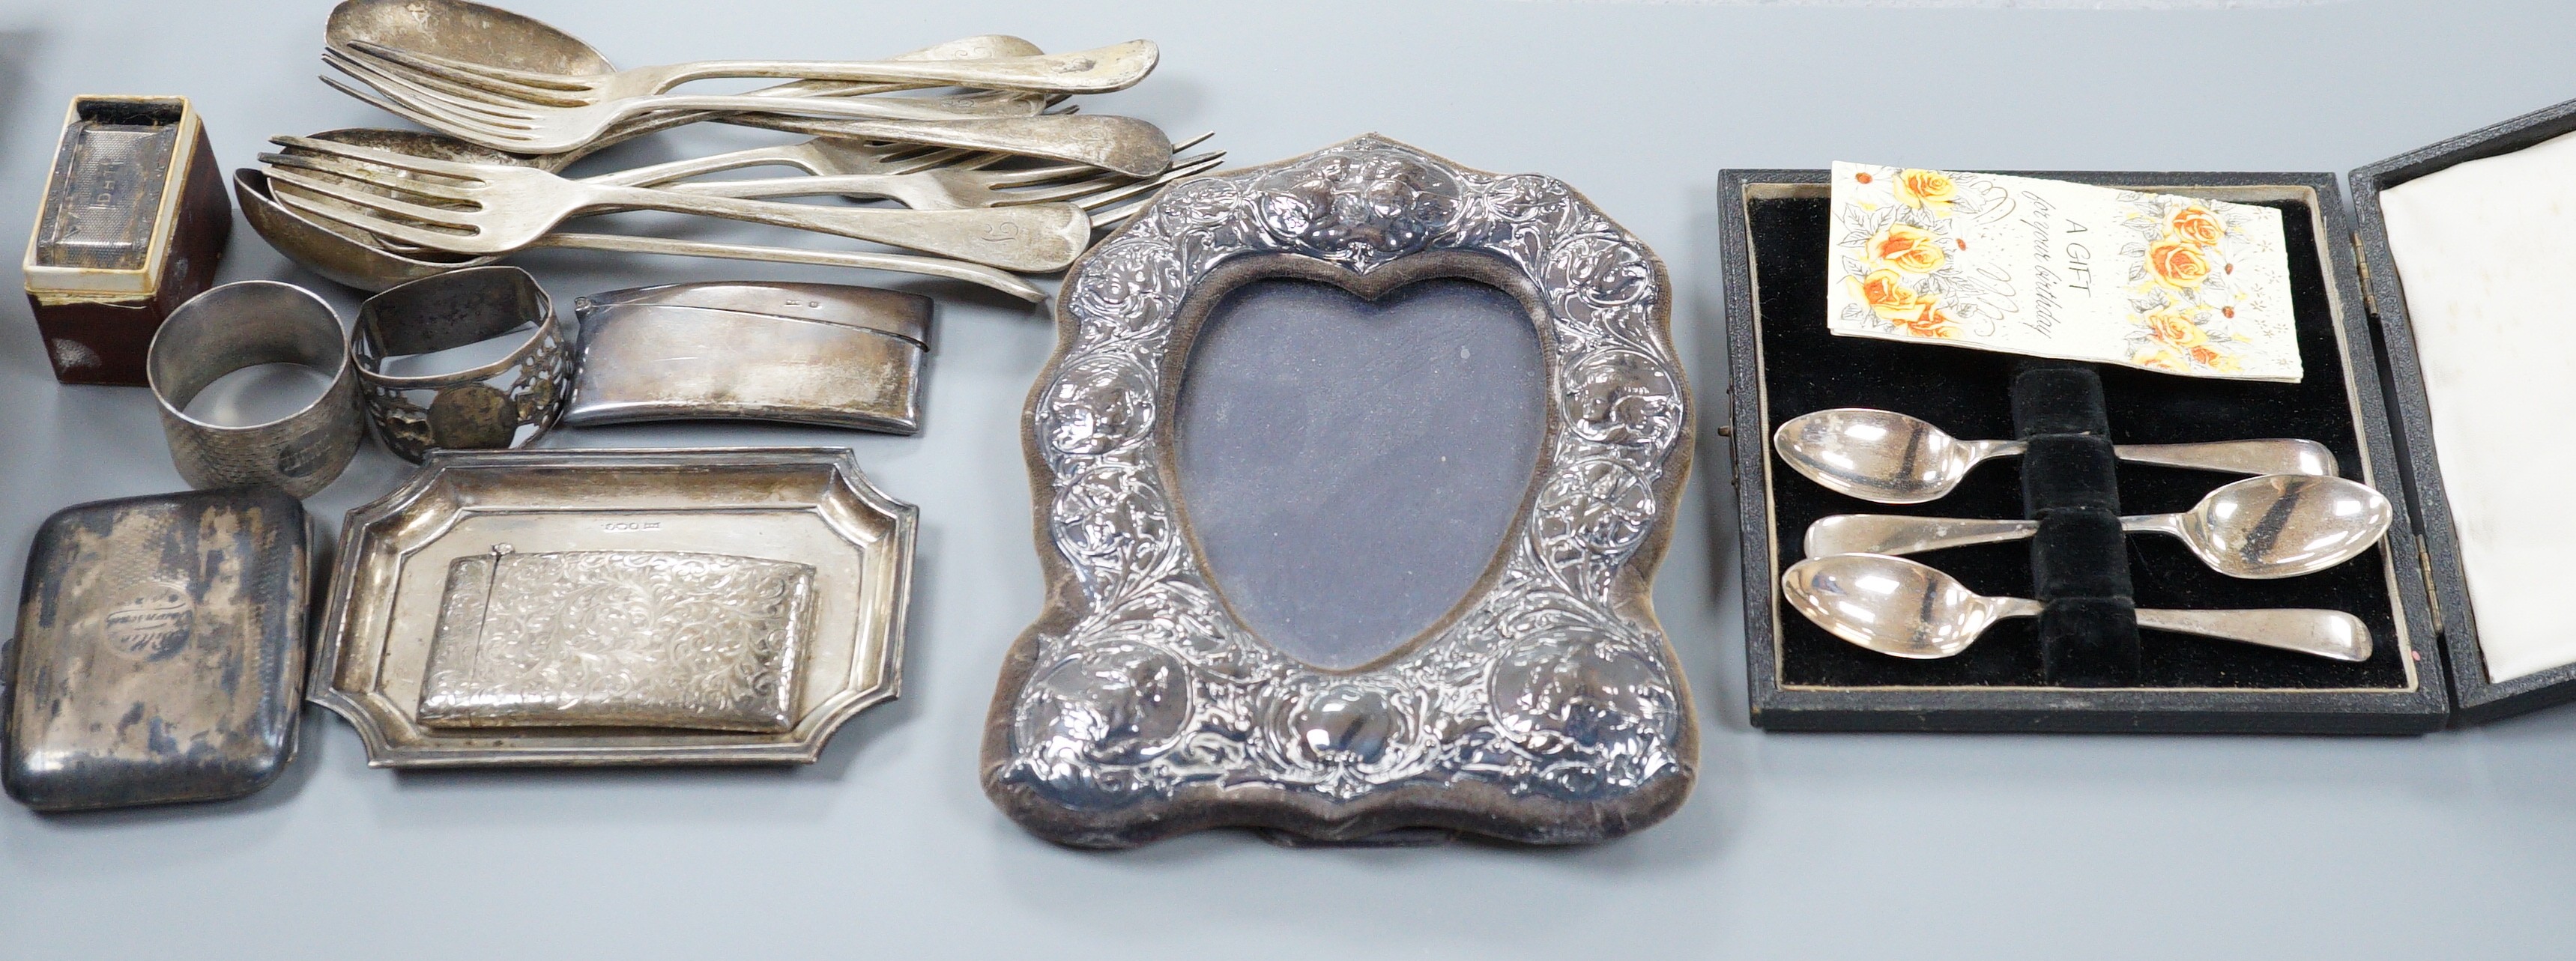 A mixed collection of silver to include cutlery, napkin rings, photograph frame, card cases, small dish, etc.